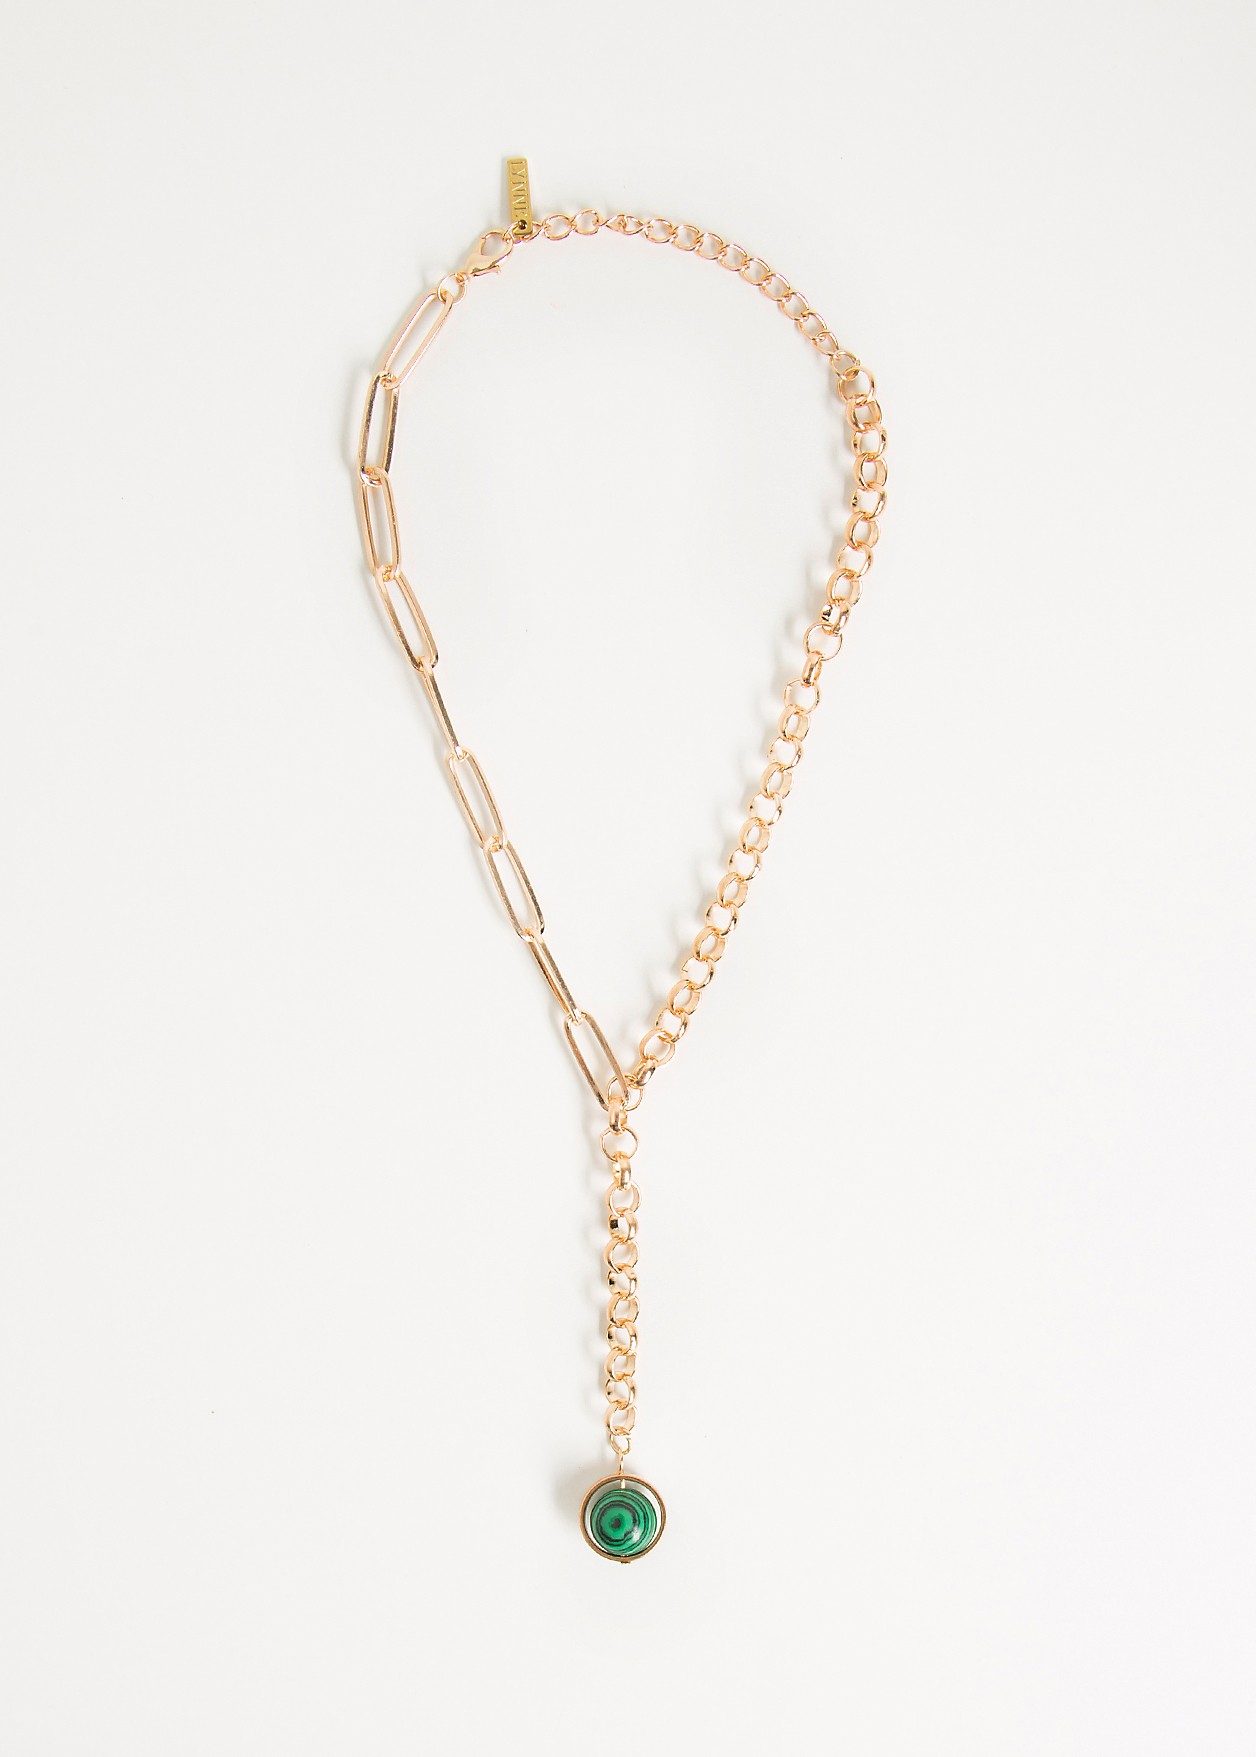 Necklace with hanging detail